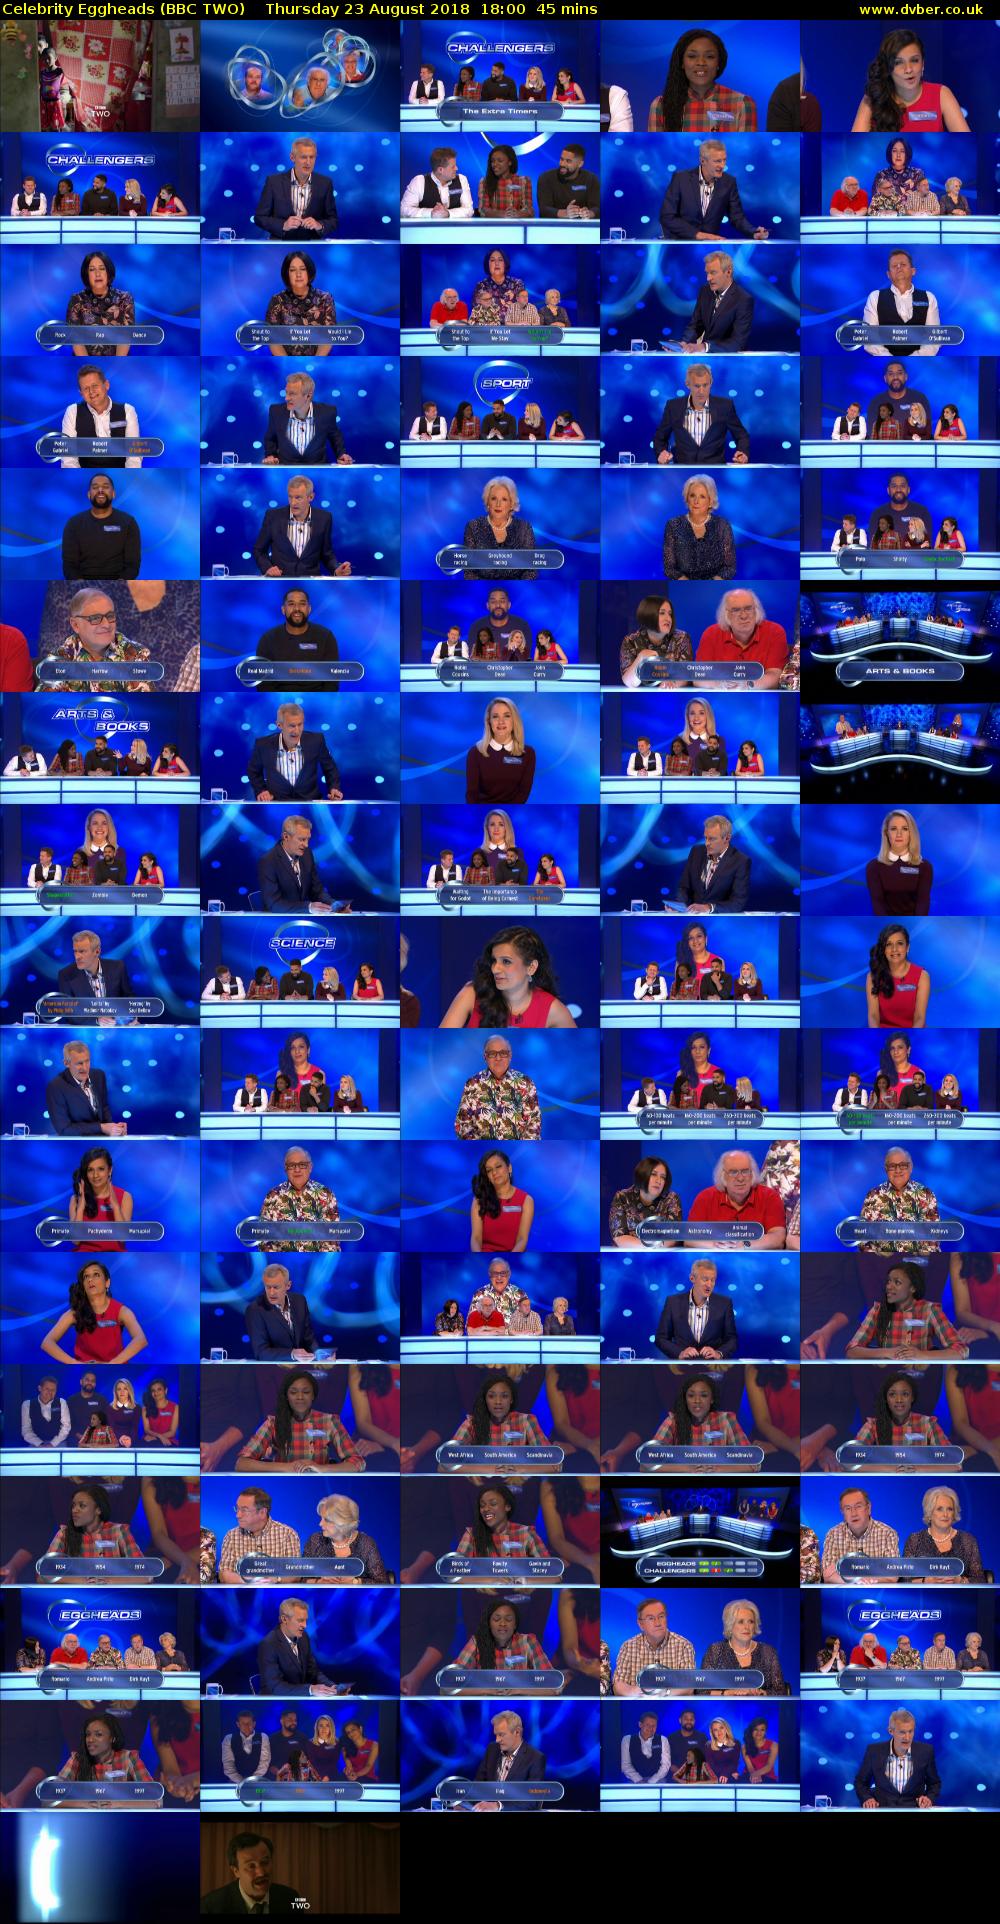 Celebrity Eggheads (BBC TWO) Thursday 23 August 2018 18:00 - 18:45